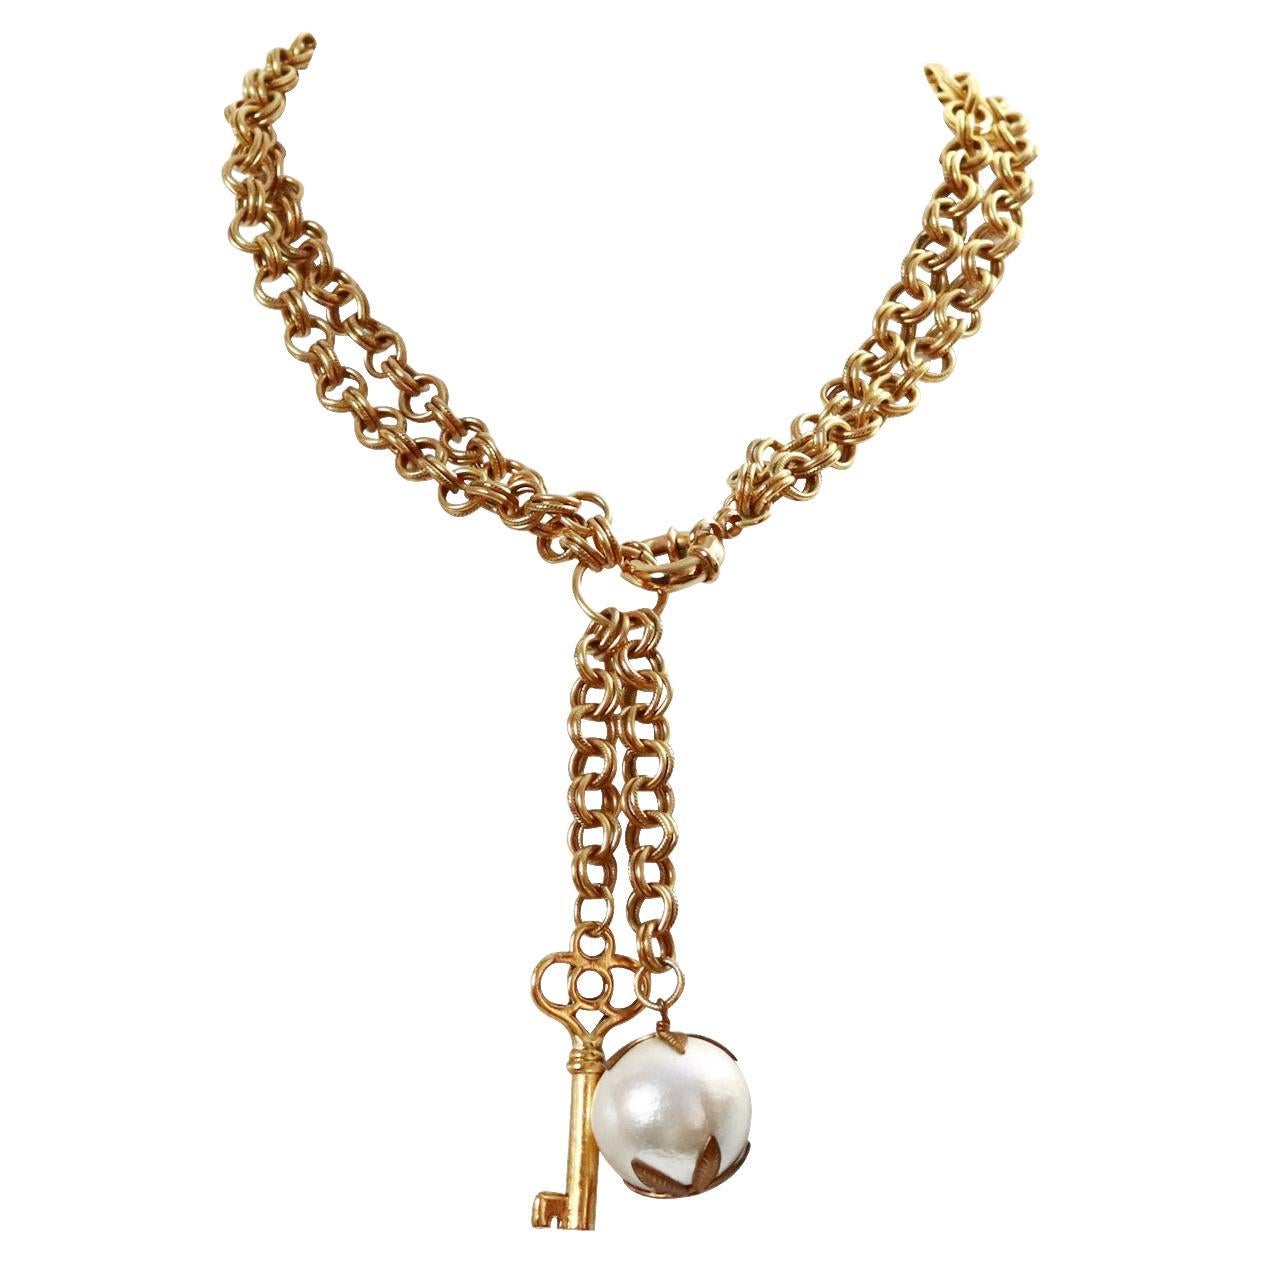 Vintage Gold Tone Lariat Drop Key and Faux Pearl Necklace Circa 1980's ...